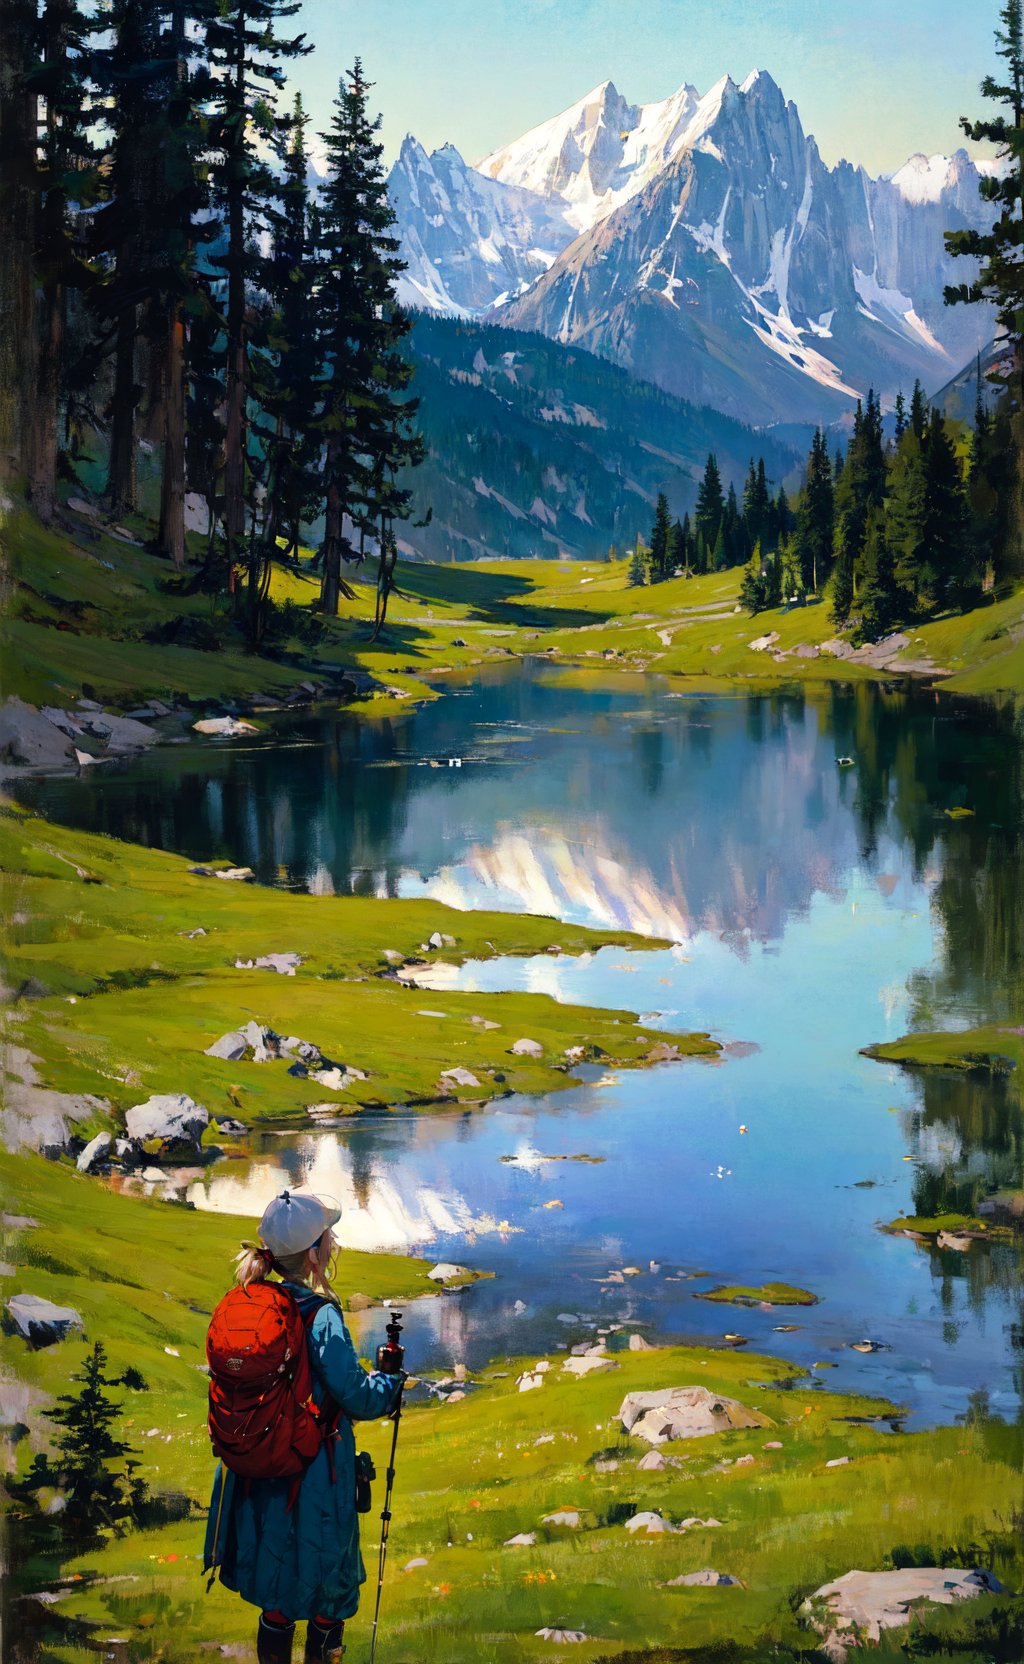 masterpiece, best quality, detailed background, ultra-detailed, illustration, 1girl, solo, outdoors, camping, night, mountains, nature, stars, moon, bonfire, tent, twin ponytails, green eyes, cheerful, happy, backpack, sleeping bag, camping stove, water bottle, mountain boots, gloves, sweater, hat, flashlight, forest, rocks, river, wood, smoke, shadows, contrast, clear sky, constellations, Milky Way, peaceful, serene, quiet, tranquil, remote, secluded, adventurous, exploration, escape, independence, survival, resourcefulness, challenge, perseverance, stamina, endurance, observation, intuition, adaptability, creativity, imagination, artistry, inspiration, beauty, awe, wonder, gratitude, appreciation, relaxation, enjoyment, rejuvenation, mindfulness, awareness, connection, harmony, balance, texture, detail, realism, depth, perspective, composition, color, light, shadow, reflection, refraction, tone, contrast, foreground, middle ground, background, naturalistic, figurative, representational, impressionistic, expressionistic, abstract, innovative, experimental, unique